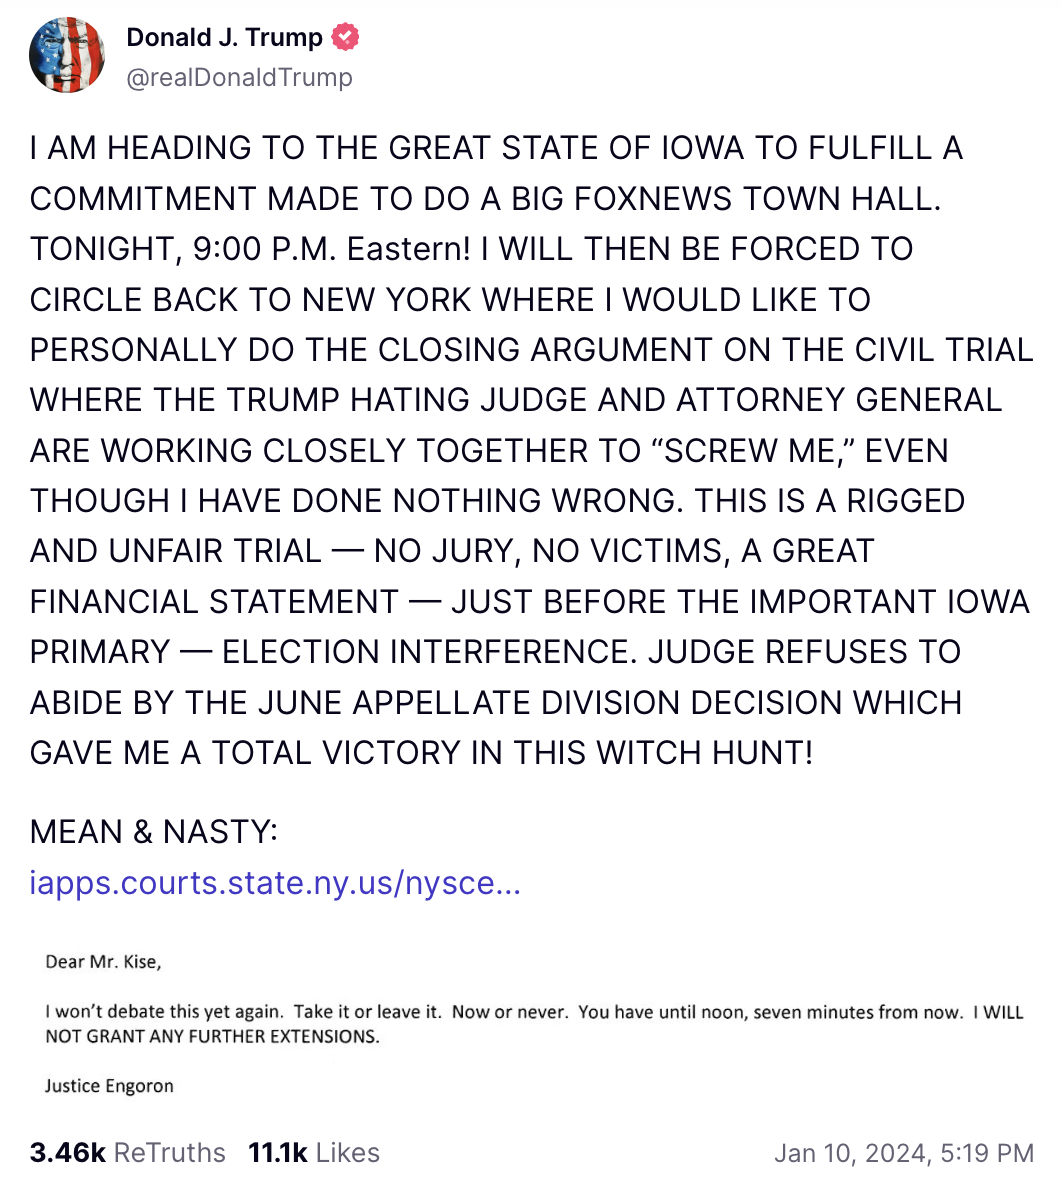 Trump Truth Social post: I AM HEADING TO THE GREAT STATE OF IOWA TO FULFILL A COMMITMENT MADE TO DO A BIG FOXNEWS TOWN HALL. TONIGHT, 9:00 P.M. Eastern! I WILL THEN BE FORCED TO CIRCLE BACK TO NEW YORK WHERE I WOULD LIKE TO PERSONALLY DO THE CLOSING ARGUMENT ON THE CIVIL TRIAL WHERE THE TRUMP HATING JUDGE AND ATTORNEY GENERAL ARE WORKING CLOSELY TOGETHER TO “SCREW ME,” EVEN THOUGH I HAVE DONE NOTHING WRONG. THIS IS A RIGGED AND UNFAIR TRIAL — NO JURY, NO VICTIMS, A GREAT FINANCIAL STATEMENT — JUST BEFORE THE IMPORTANT IOWA PRIMARY — ELECTION INTERFERENCE. JUDGE REFUSES TO ABIDE BY THE JUNE APPELLATE DIVISION DECISION WHICH GAVE ME A TOTAL VICTORY IN THIS WITCH HUNT! MEAN & NASTY: